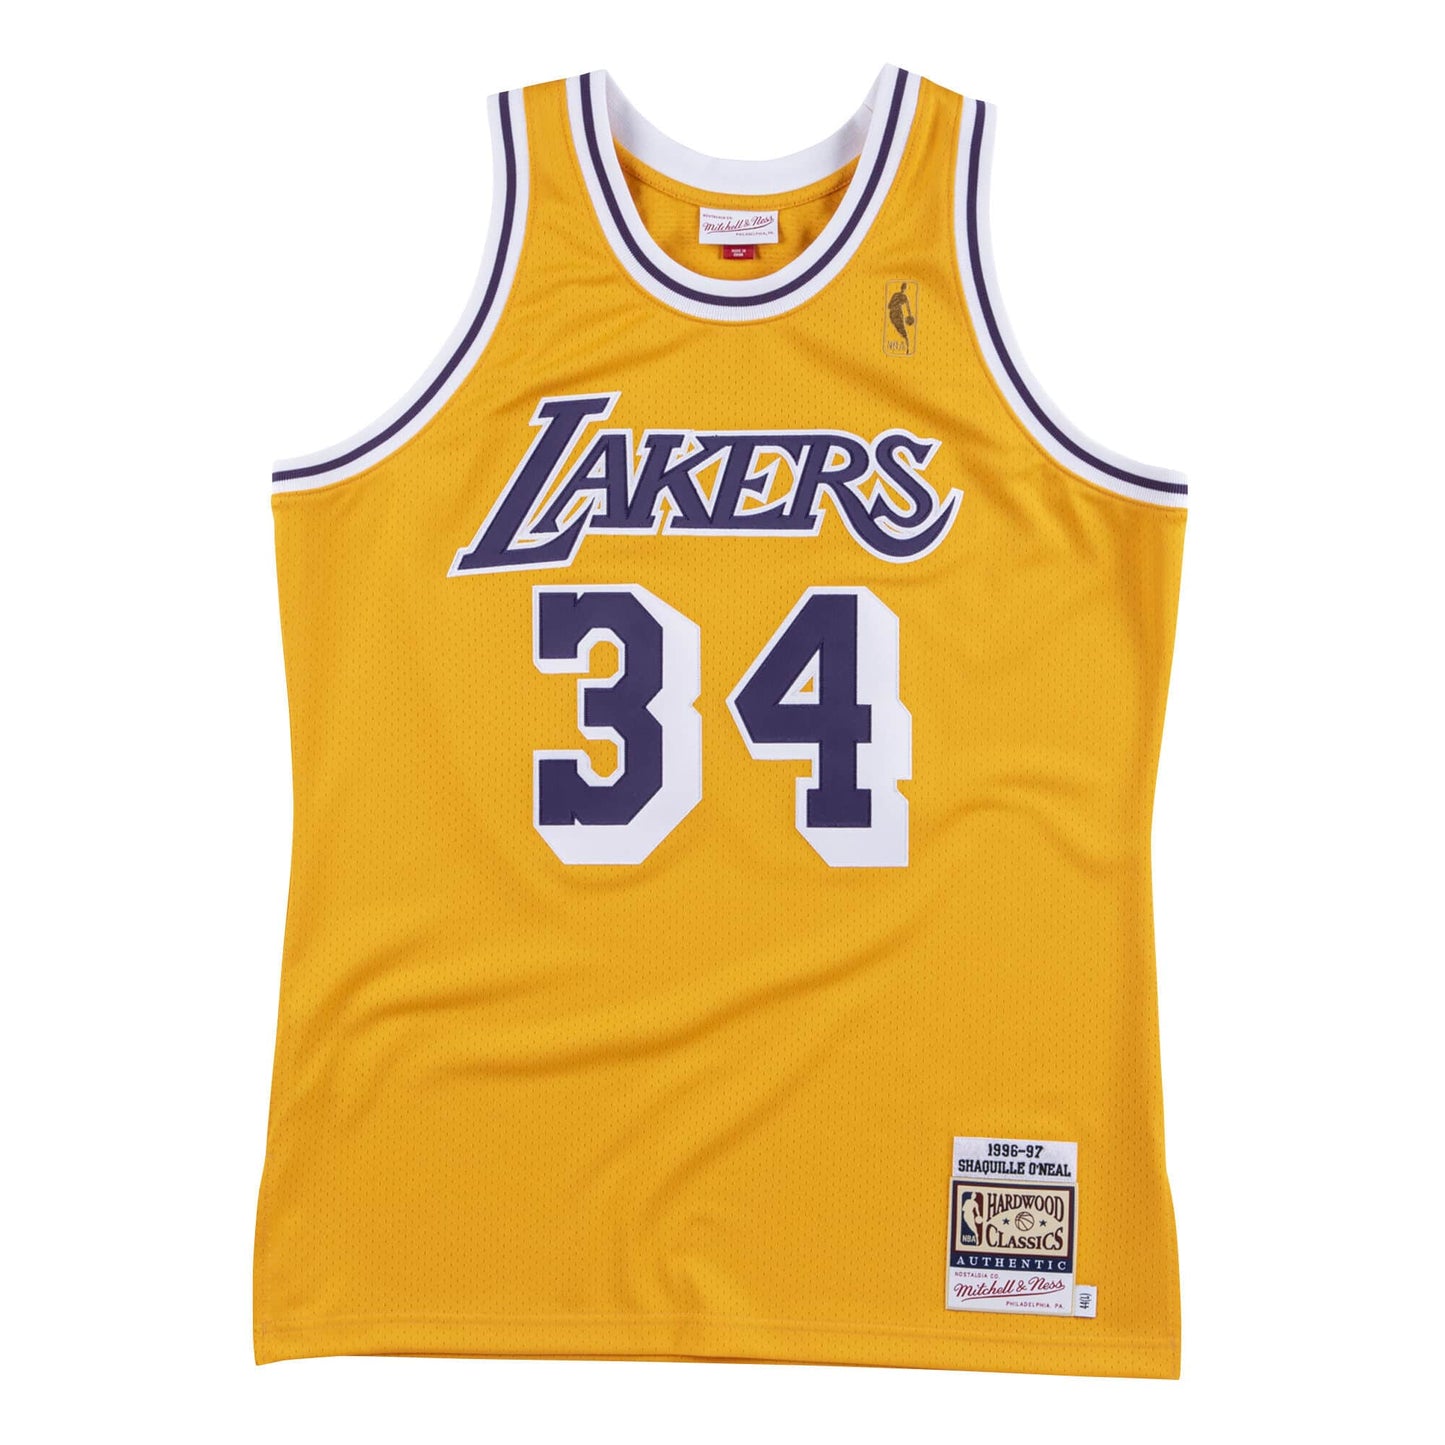 Authentic Shaquille O'Neal Los Angeles Lakers 1996-97 Jersey